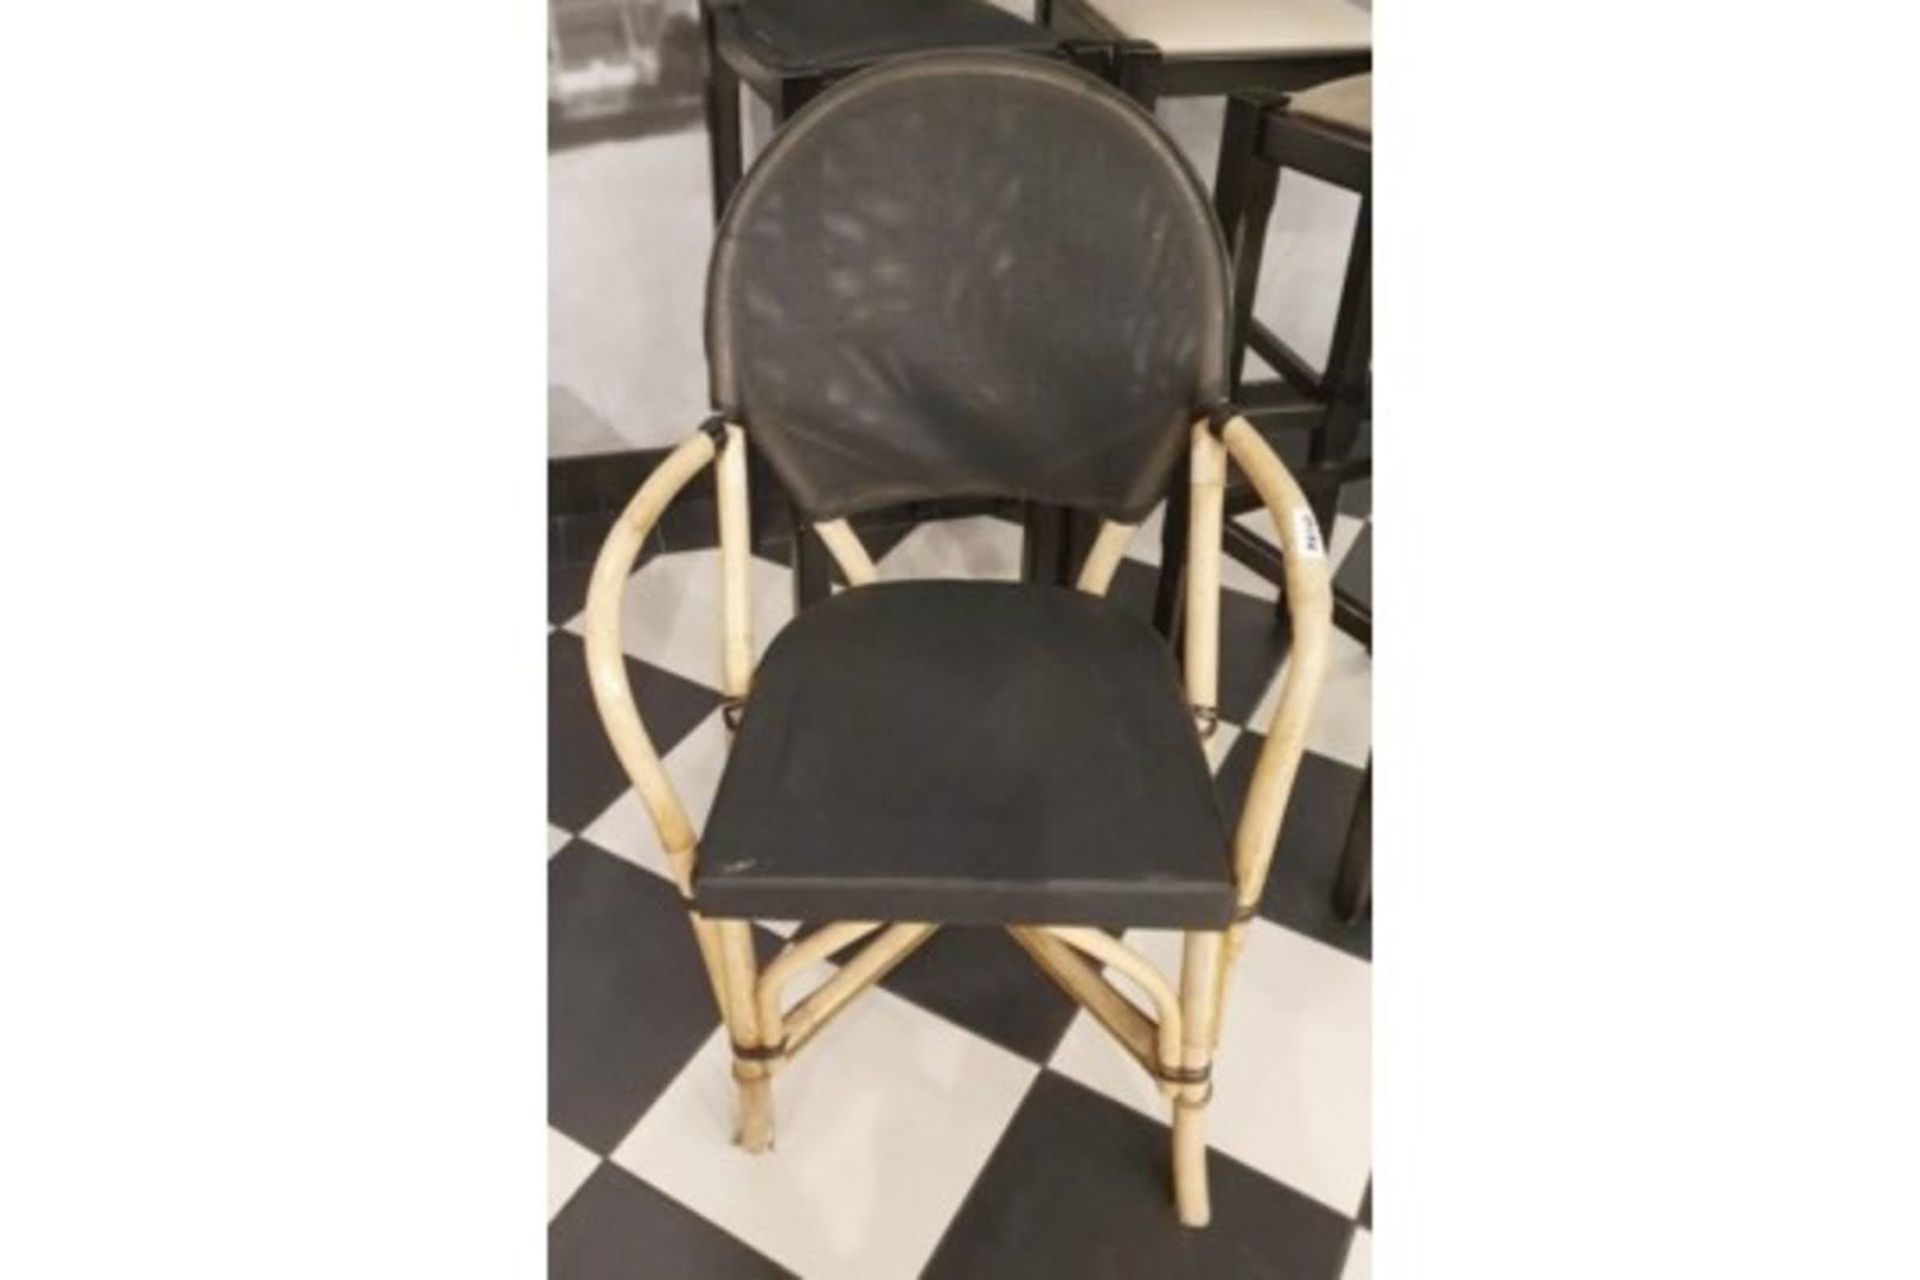 2 x Bamboo Studio Chair With Black Seat and Back Rest - Features the Name 'PAUL' Printed on the Back - Image 2 of 6